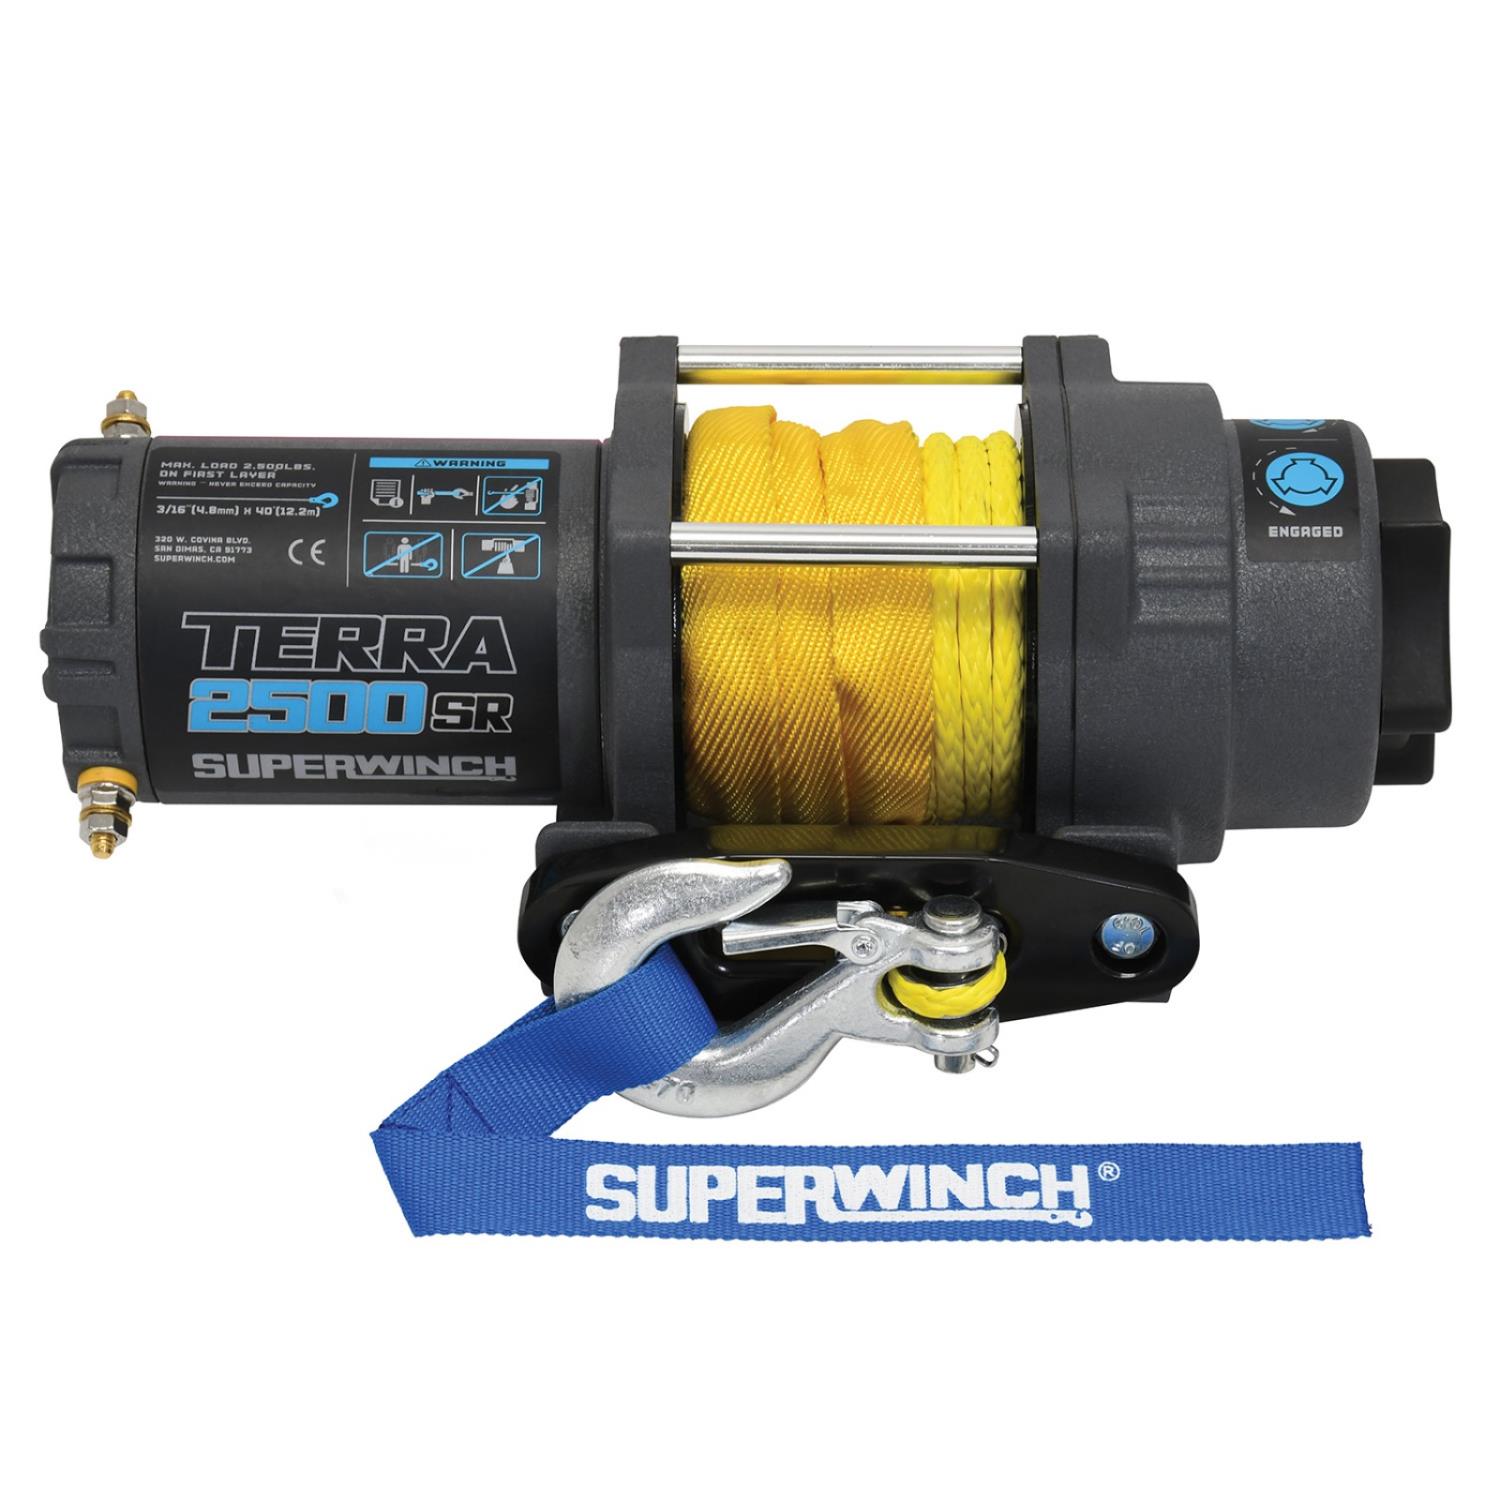 Terra 2500SR Winch Rated Line Pull 2,500-lb. [Synthetic Rope]